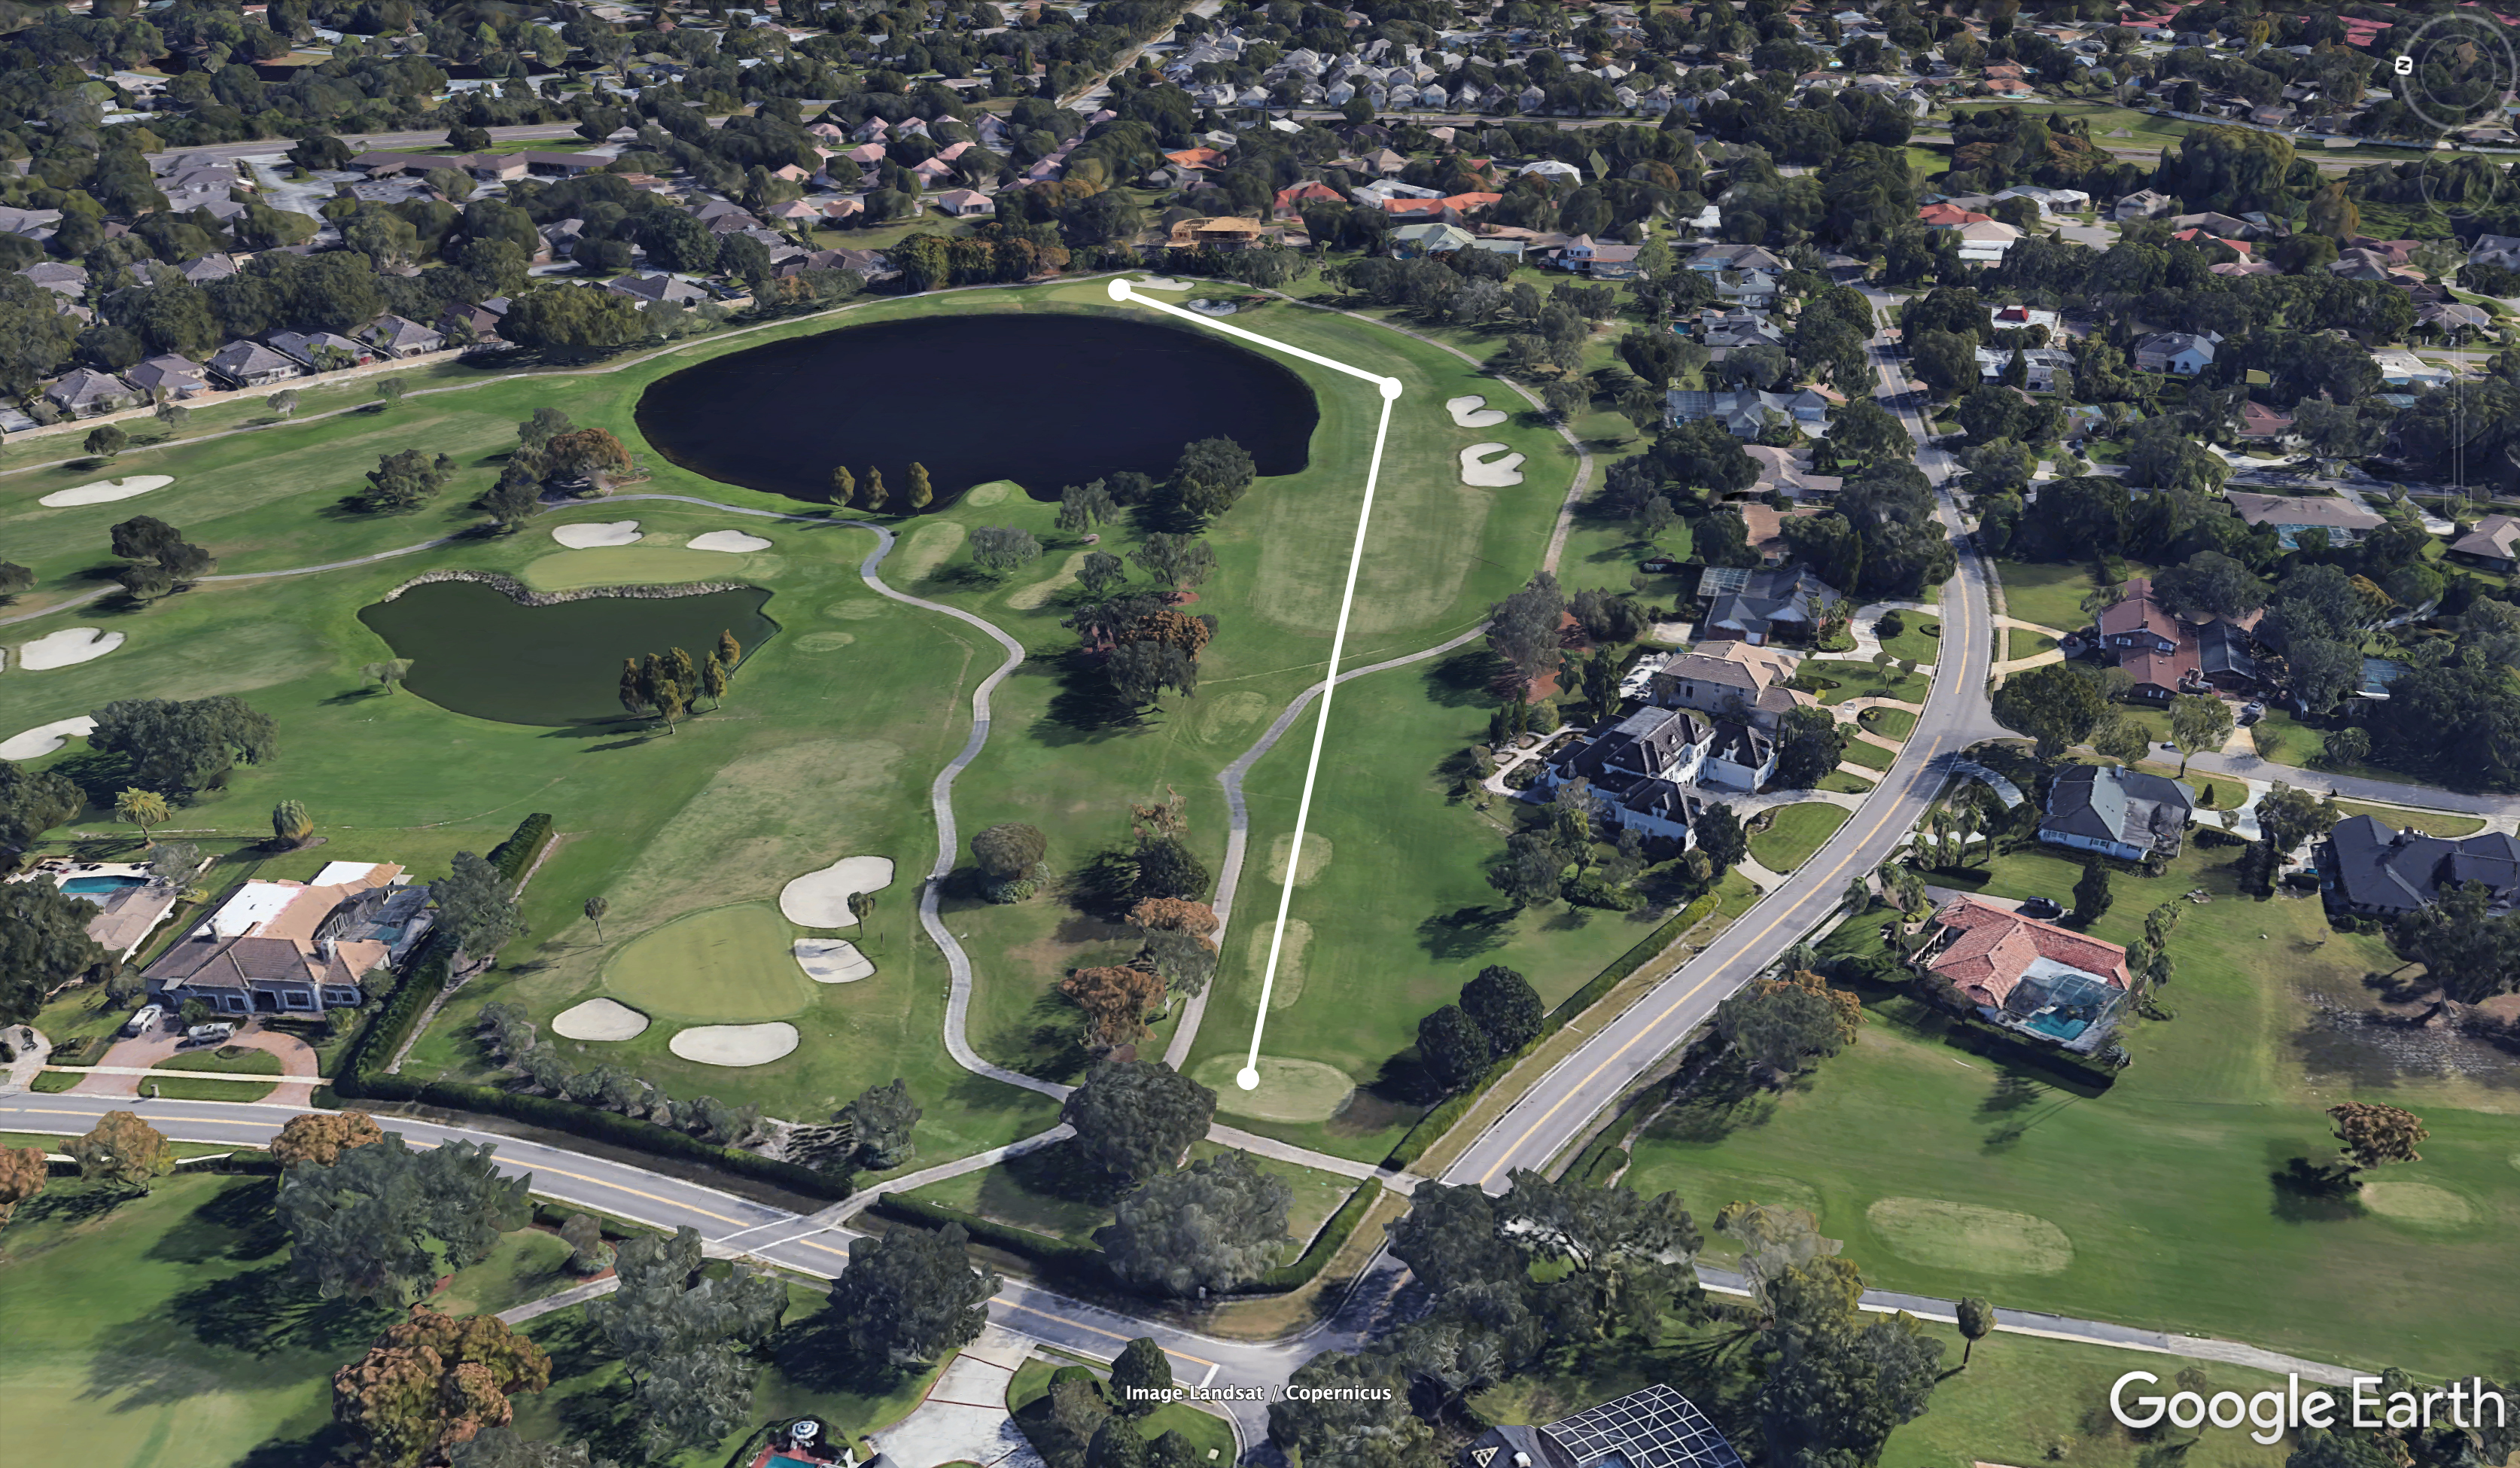 A closer look at Bay Hill's 11th hole and how it achieves intrigue